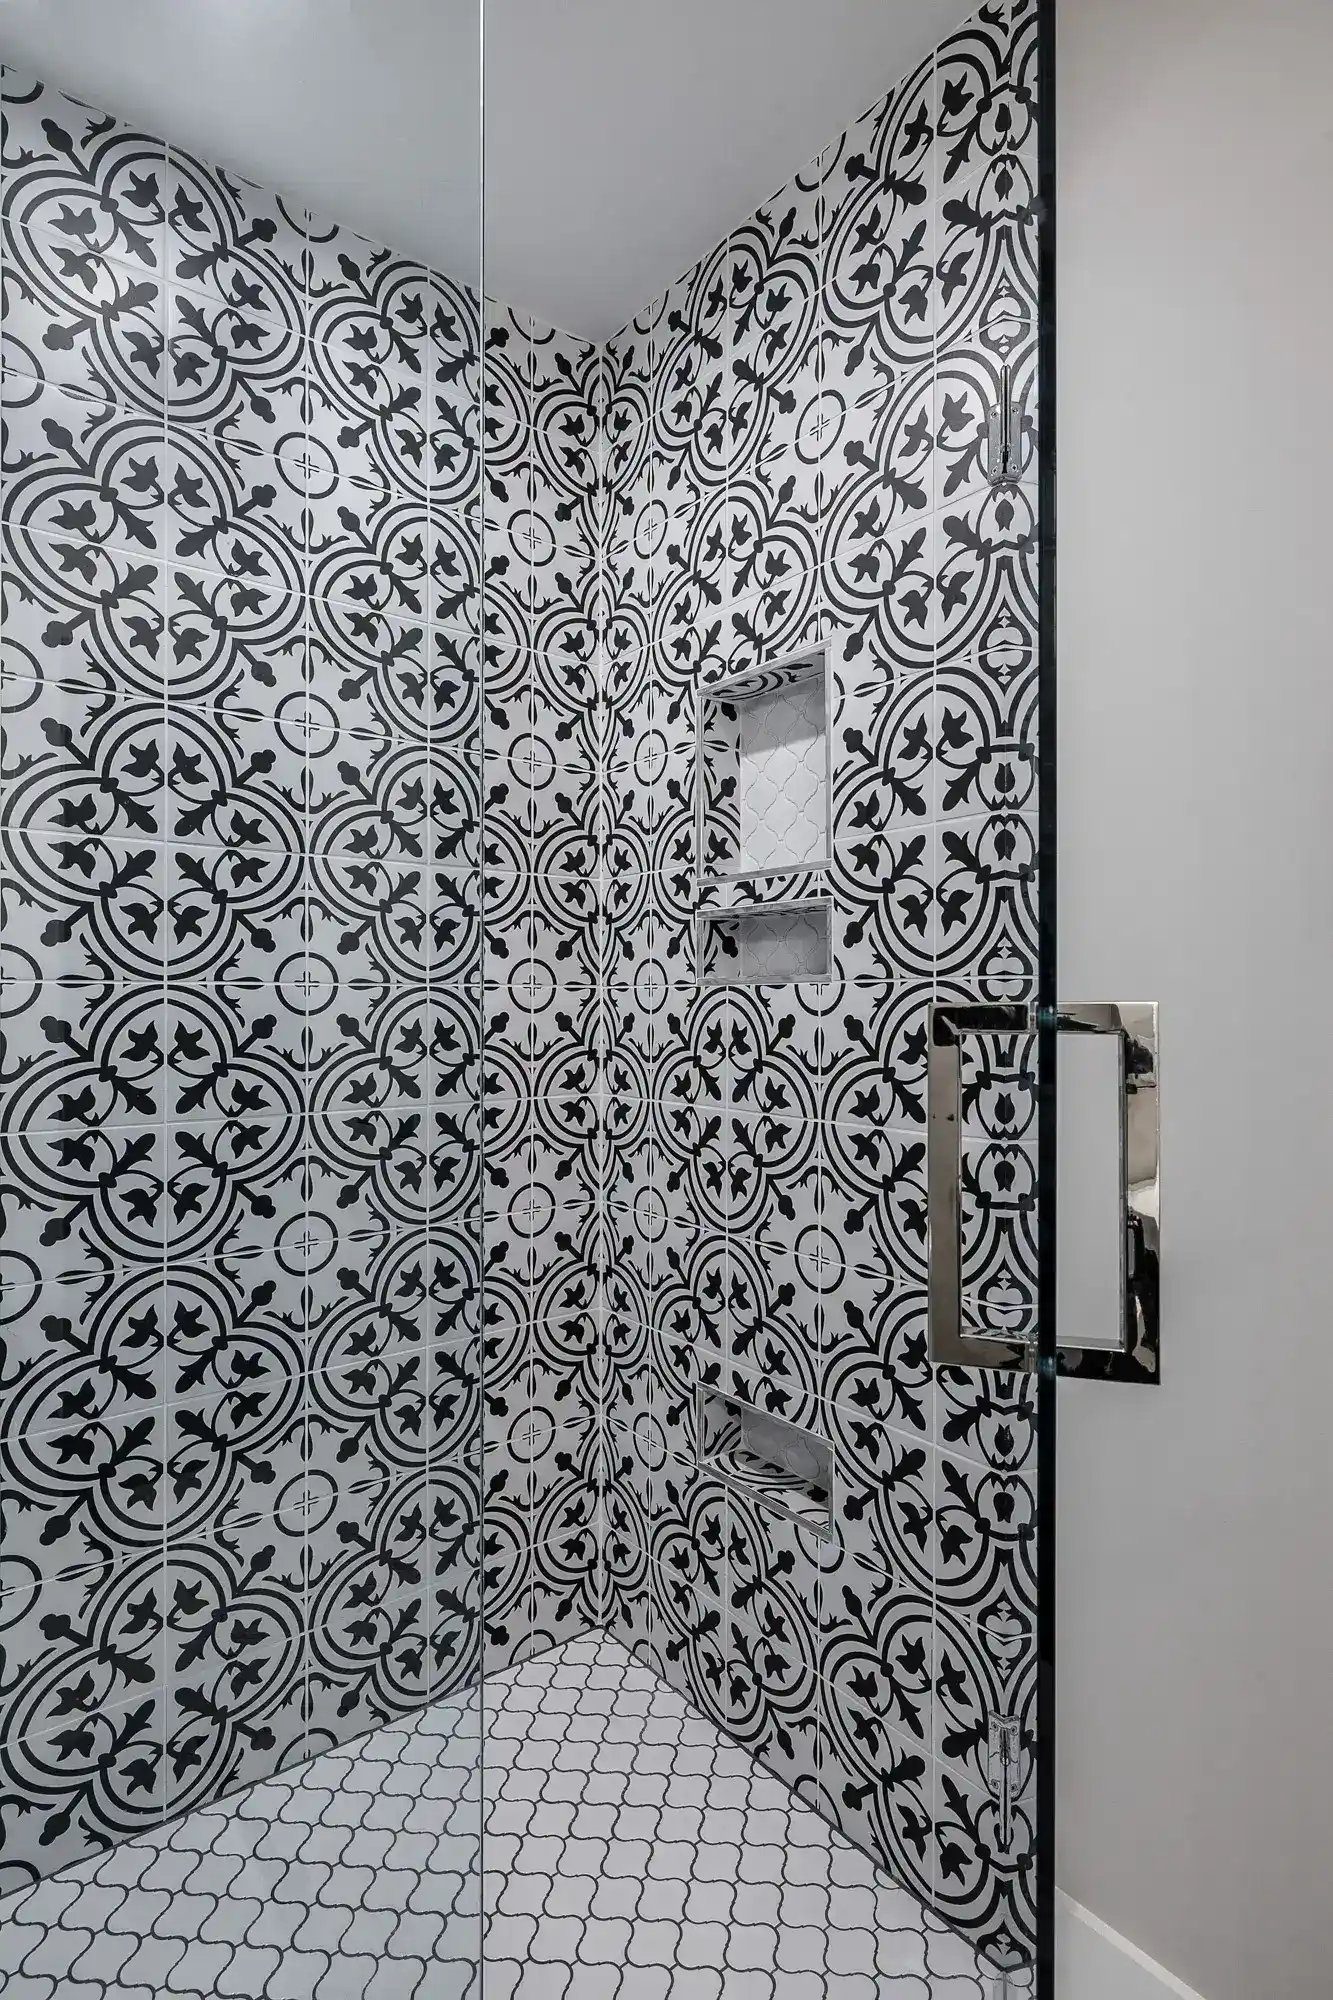 Monochromatic bathroom shower with bold patterned tiles and a modern glass door